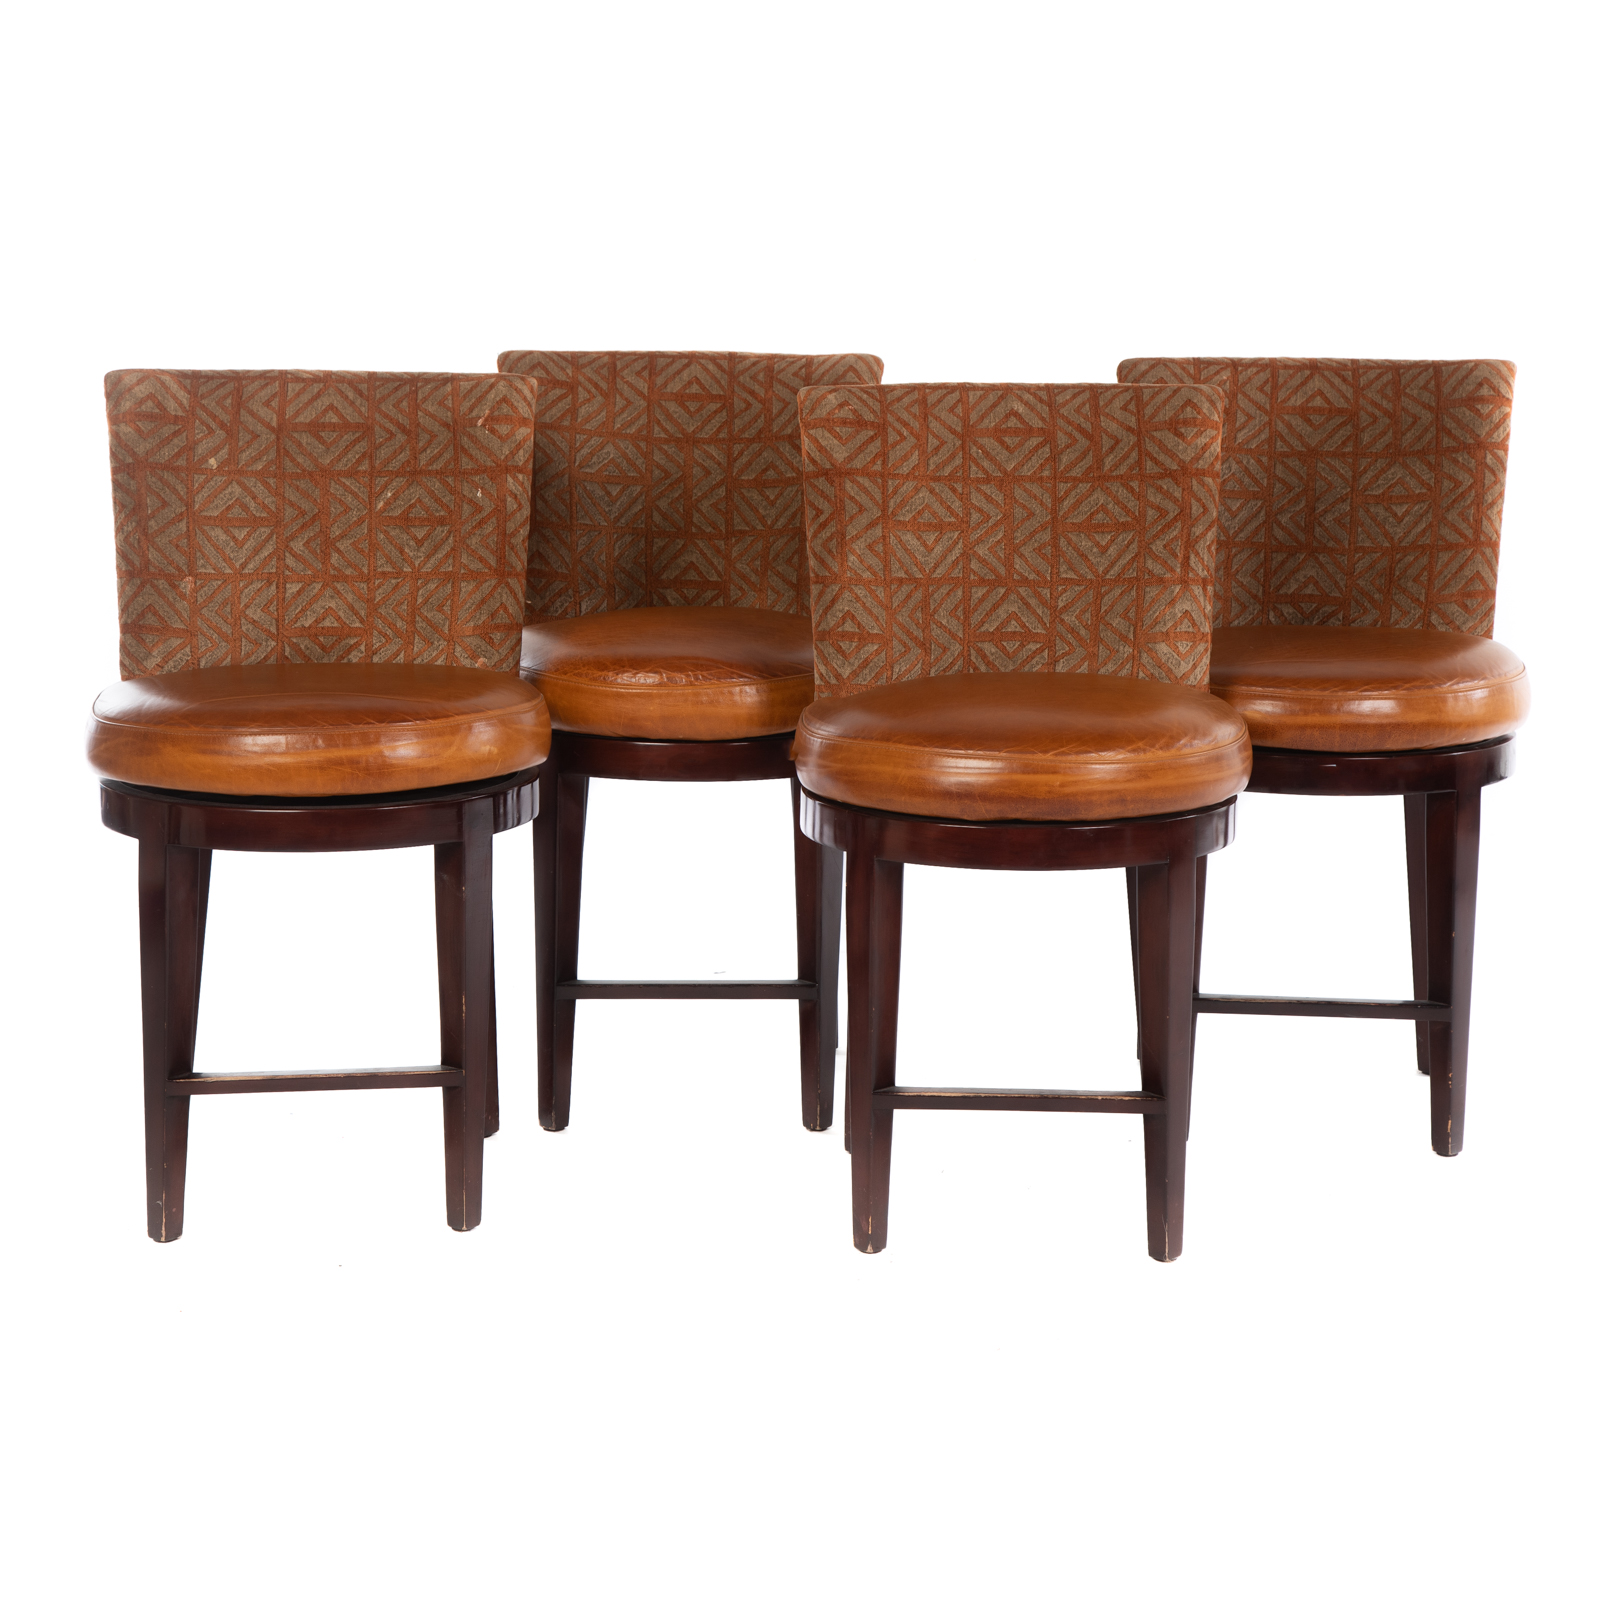 SET OF FOUR LEATHER UPHOLSTERED 287653